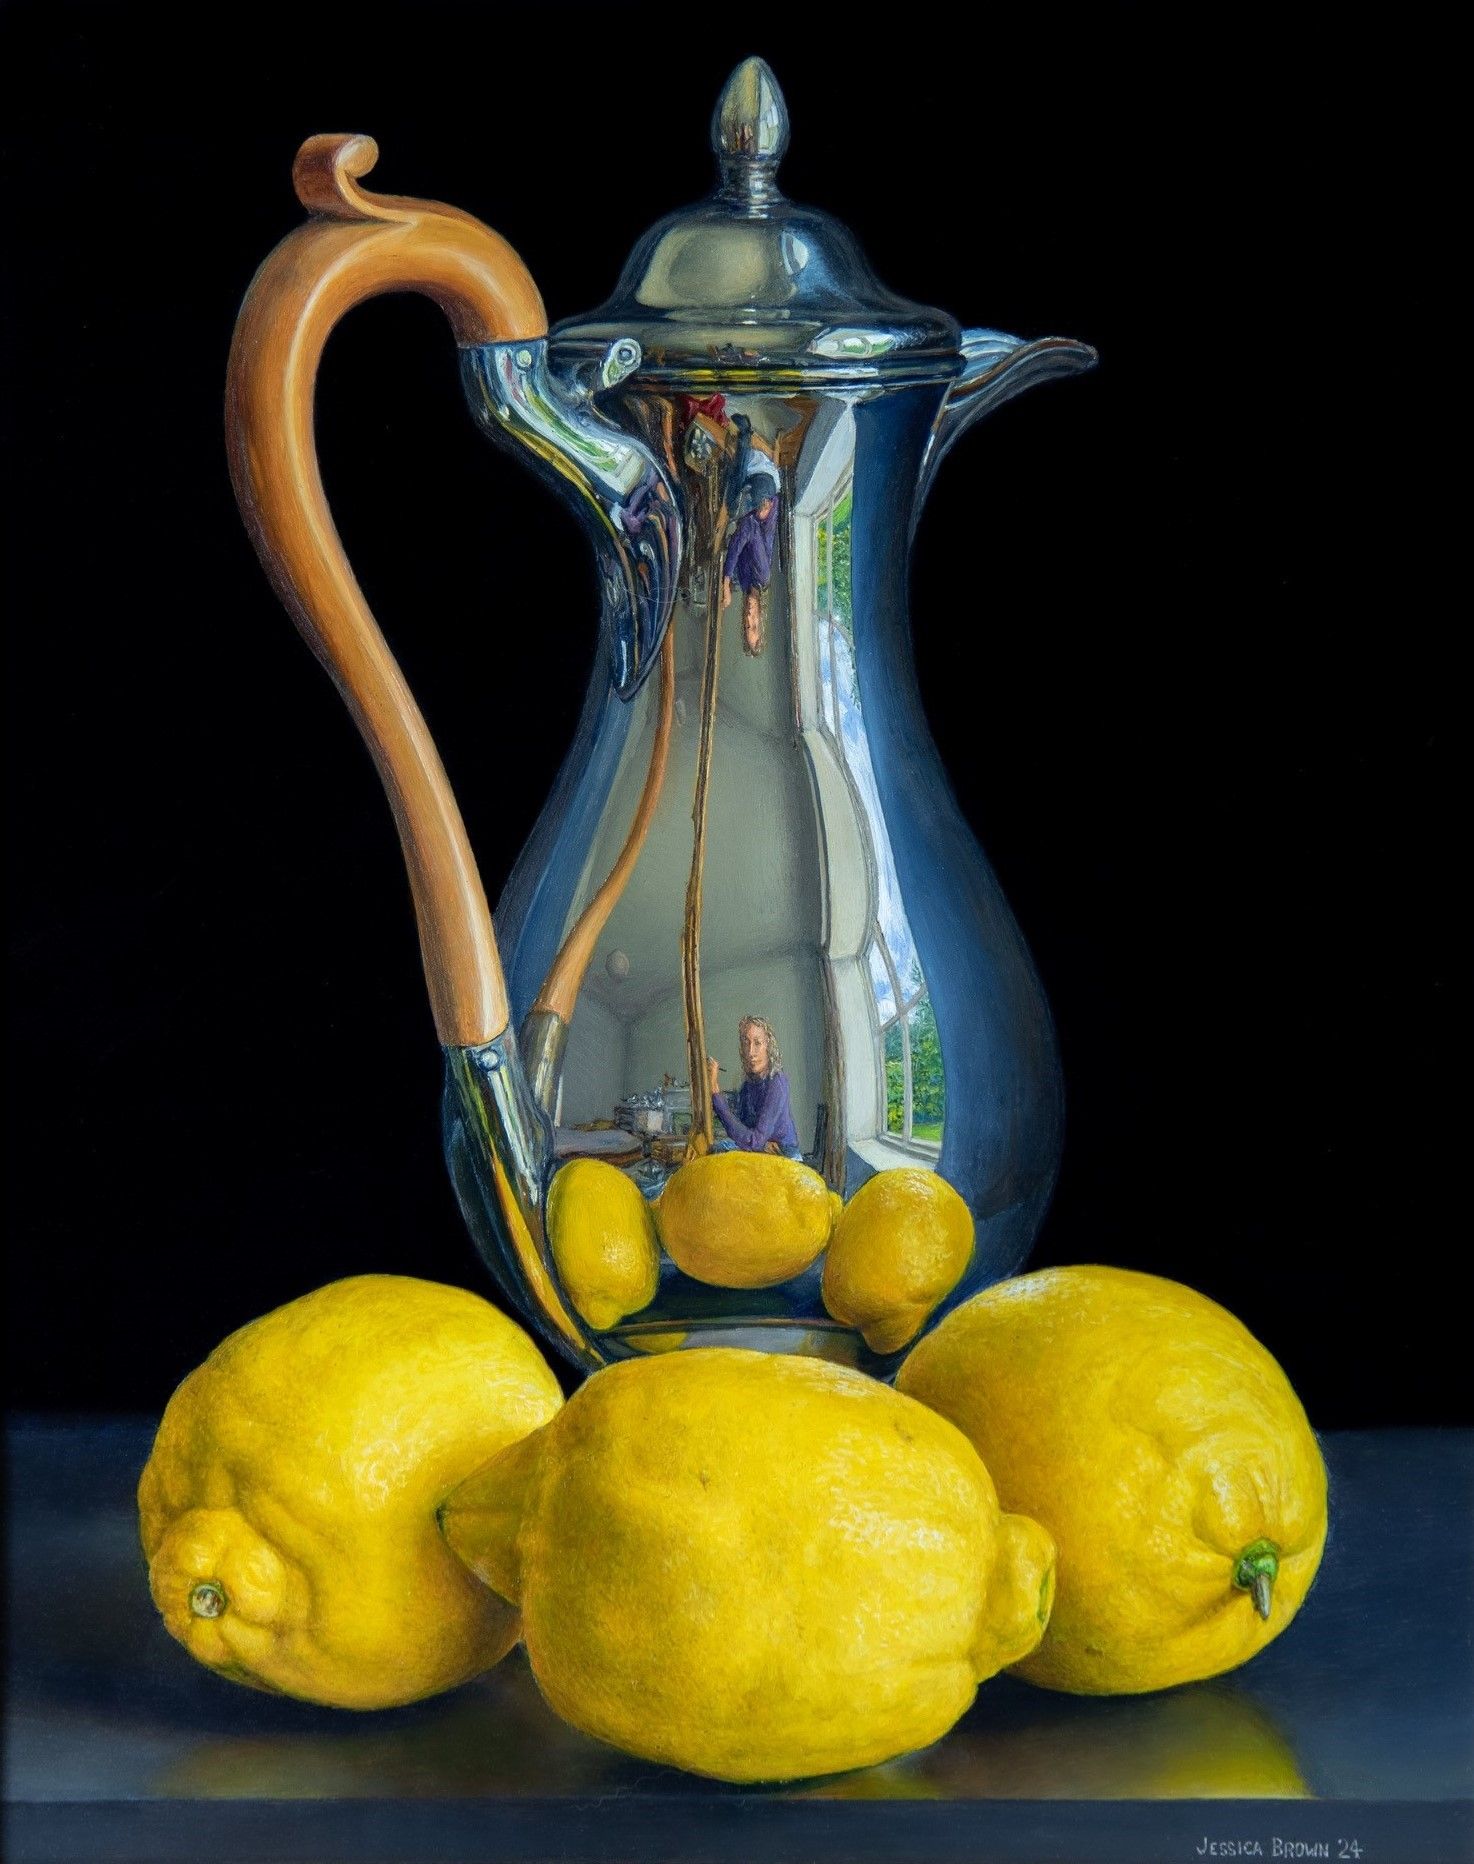 Jessica Brown - Still Life with Silver Jug and Lemons 